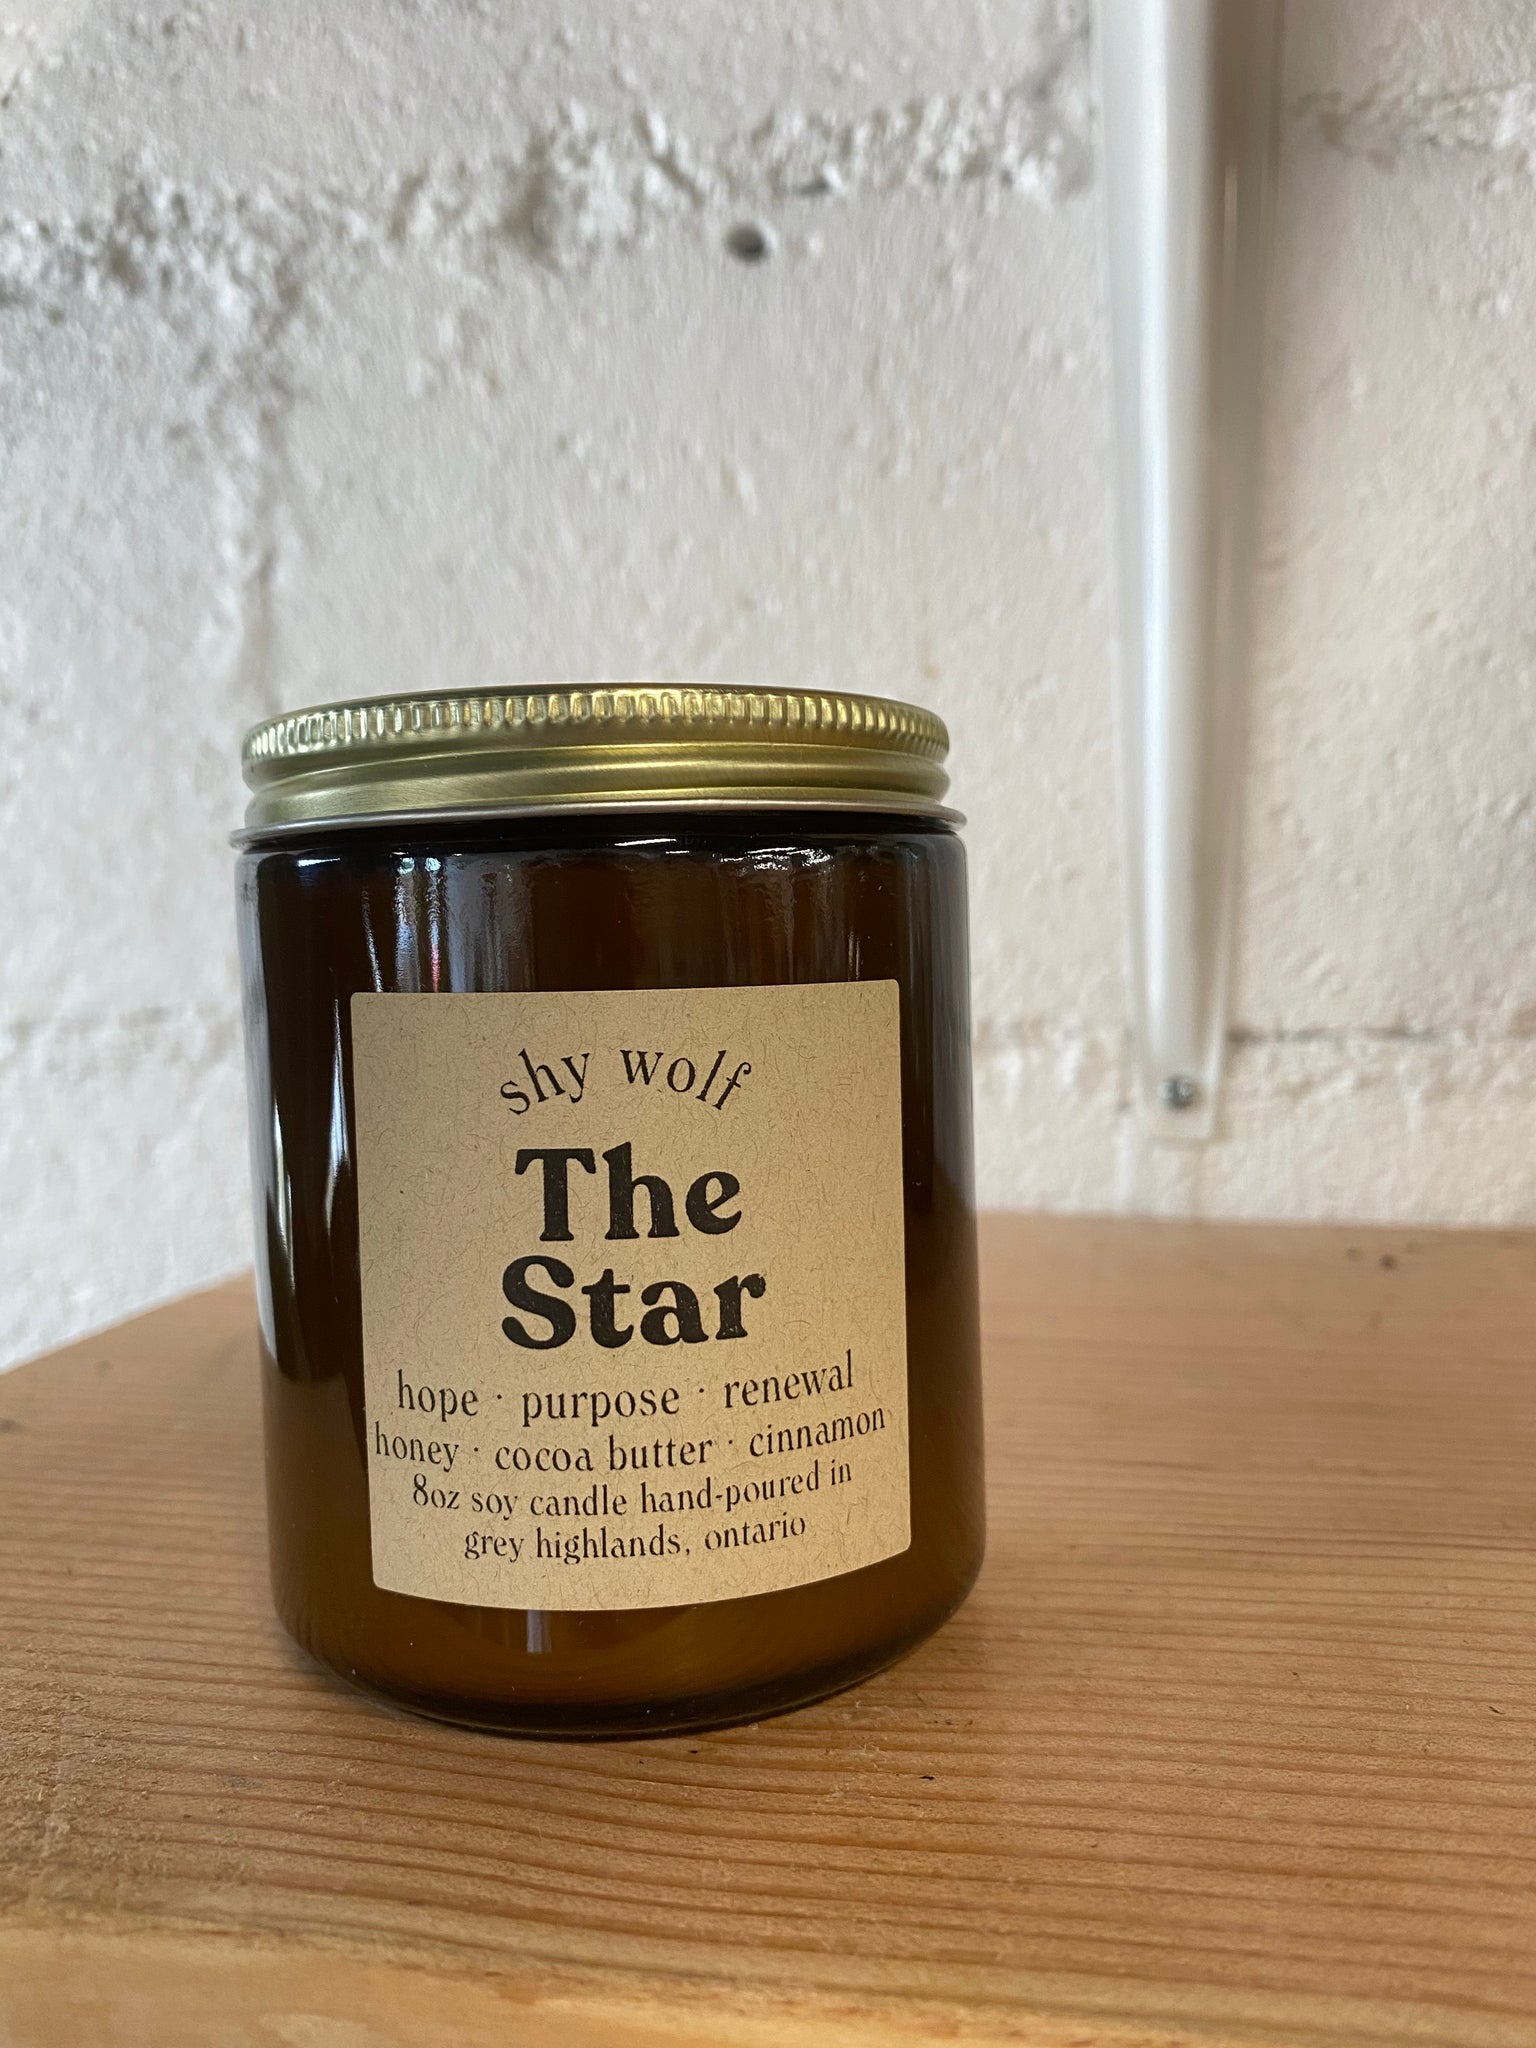 Shy Wolf Sustainable Grown Candles